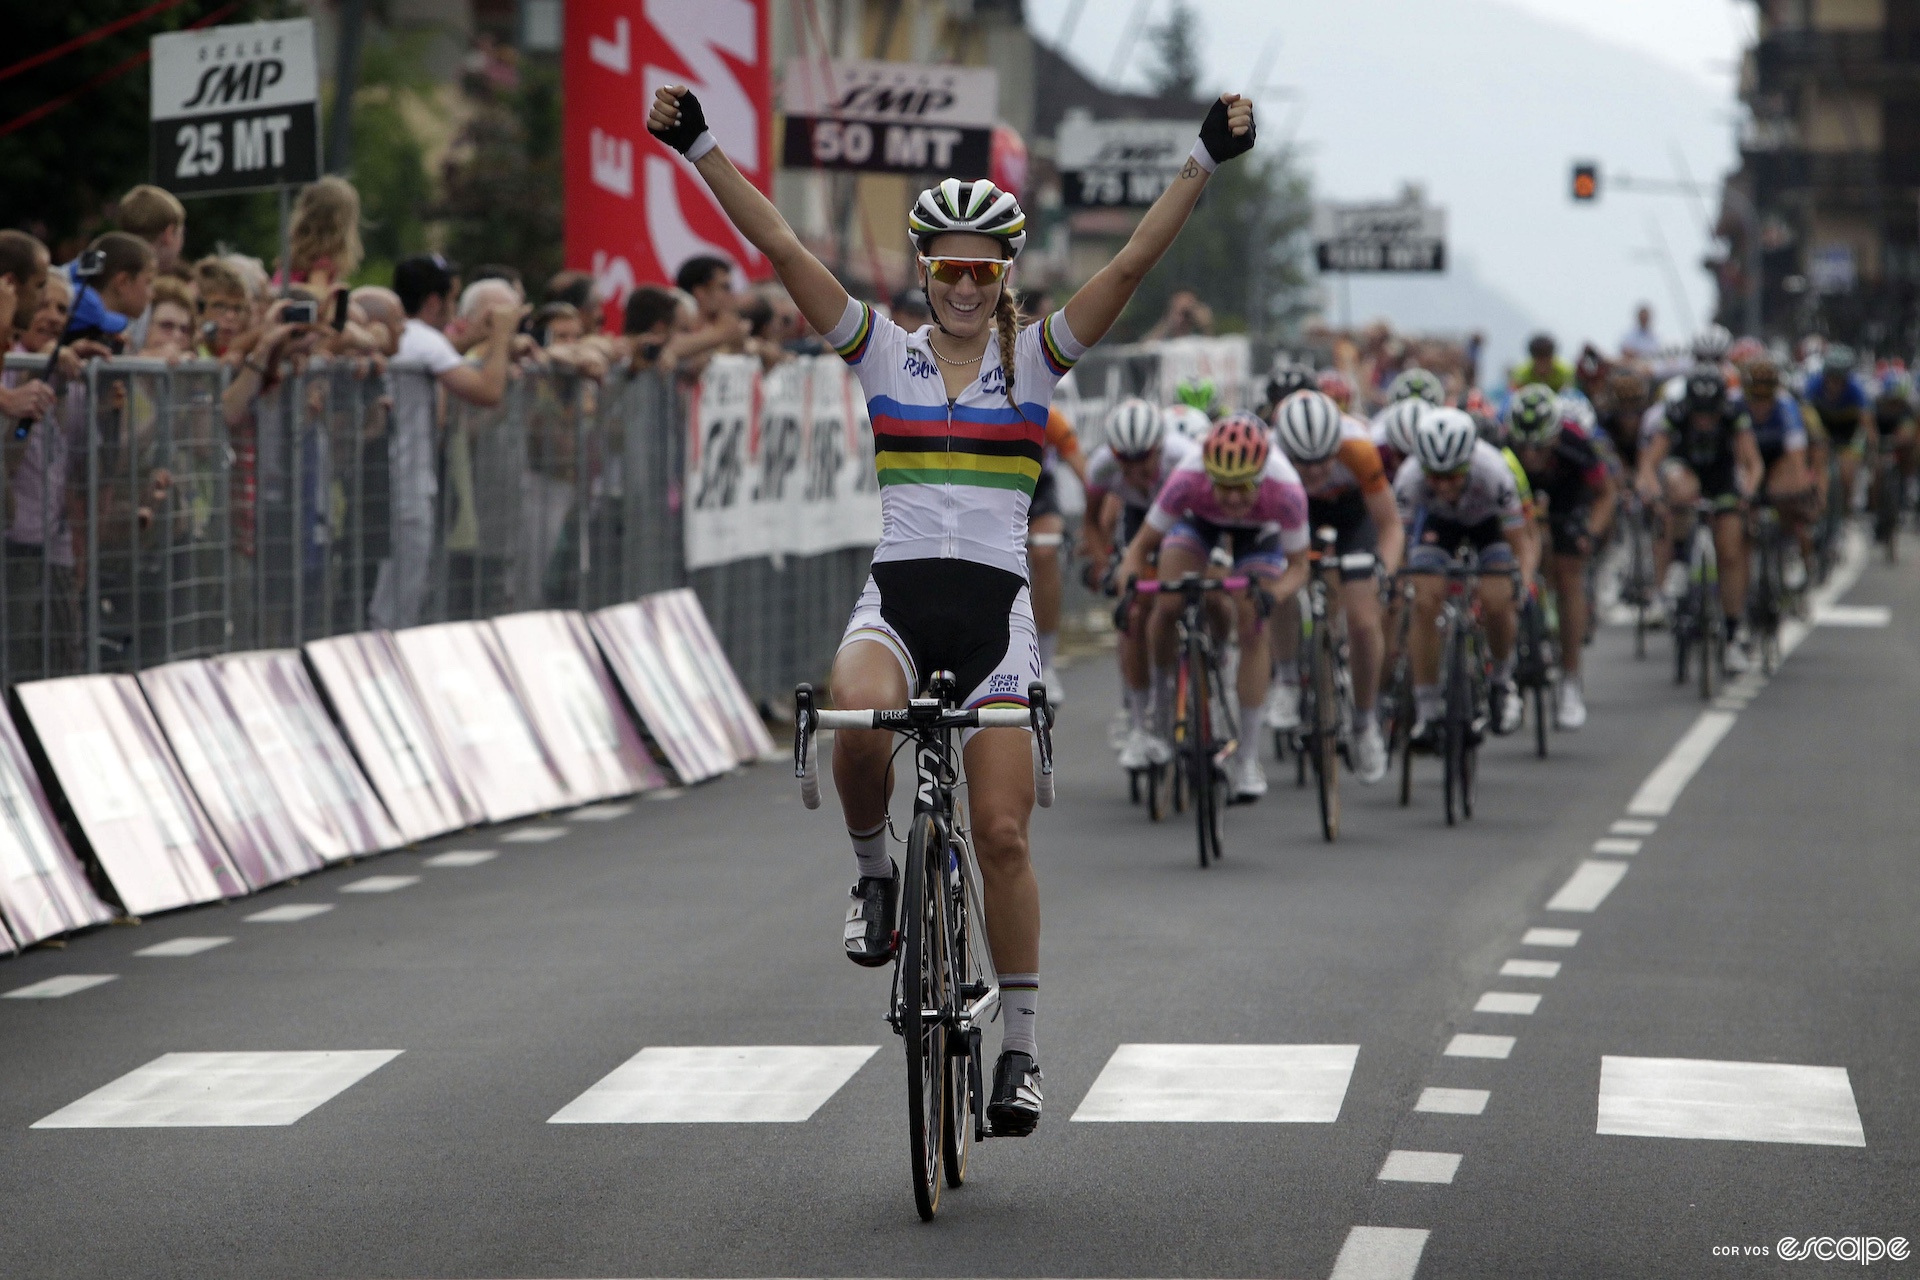 A woman raises her arms in victory as she wins a bike race, behind a group of women on bikes chases her.